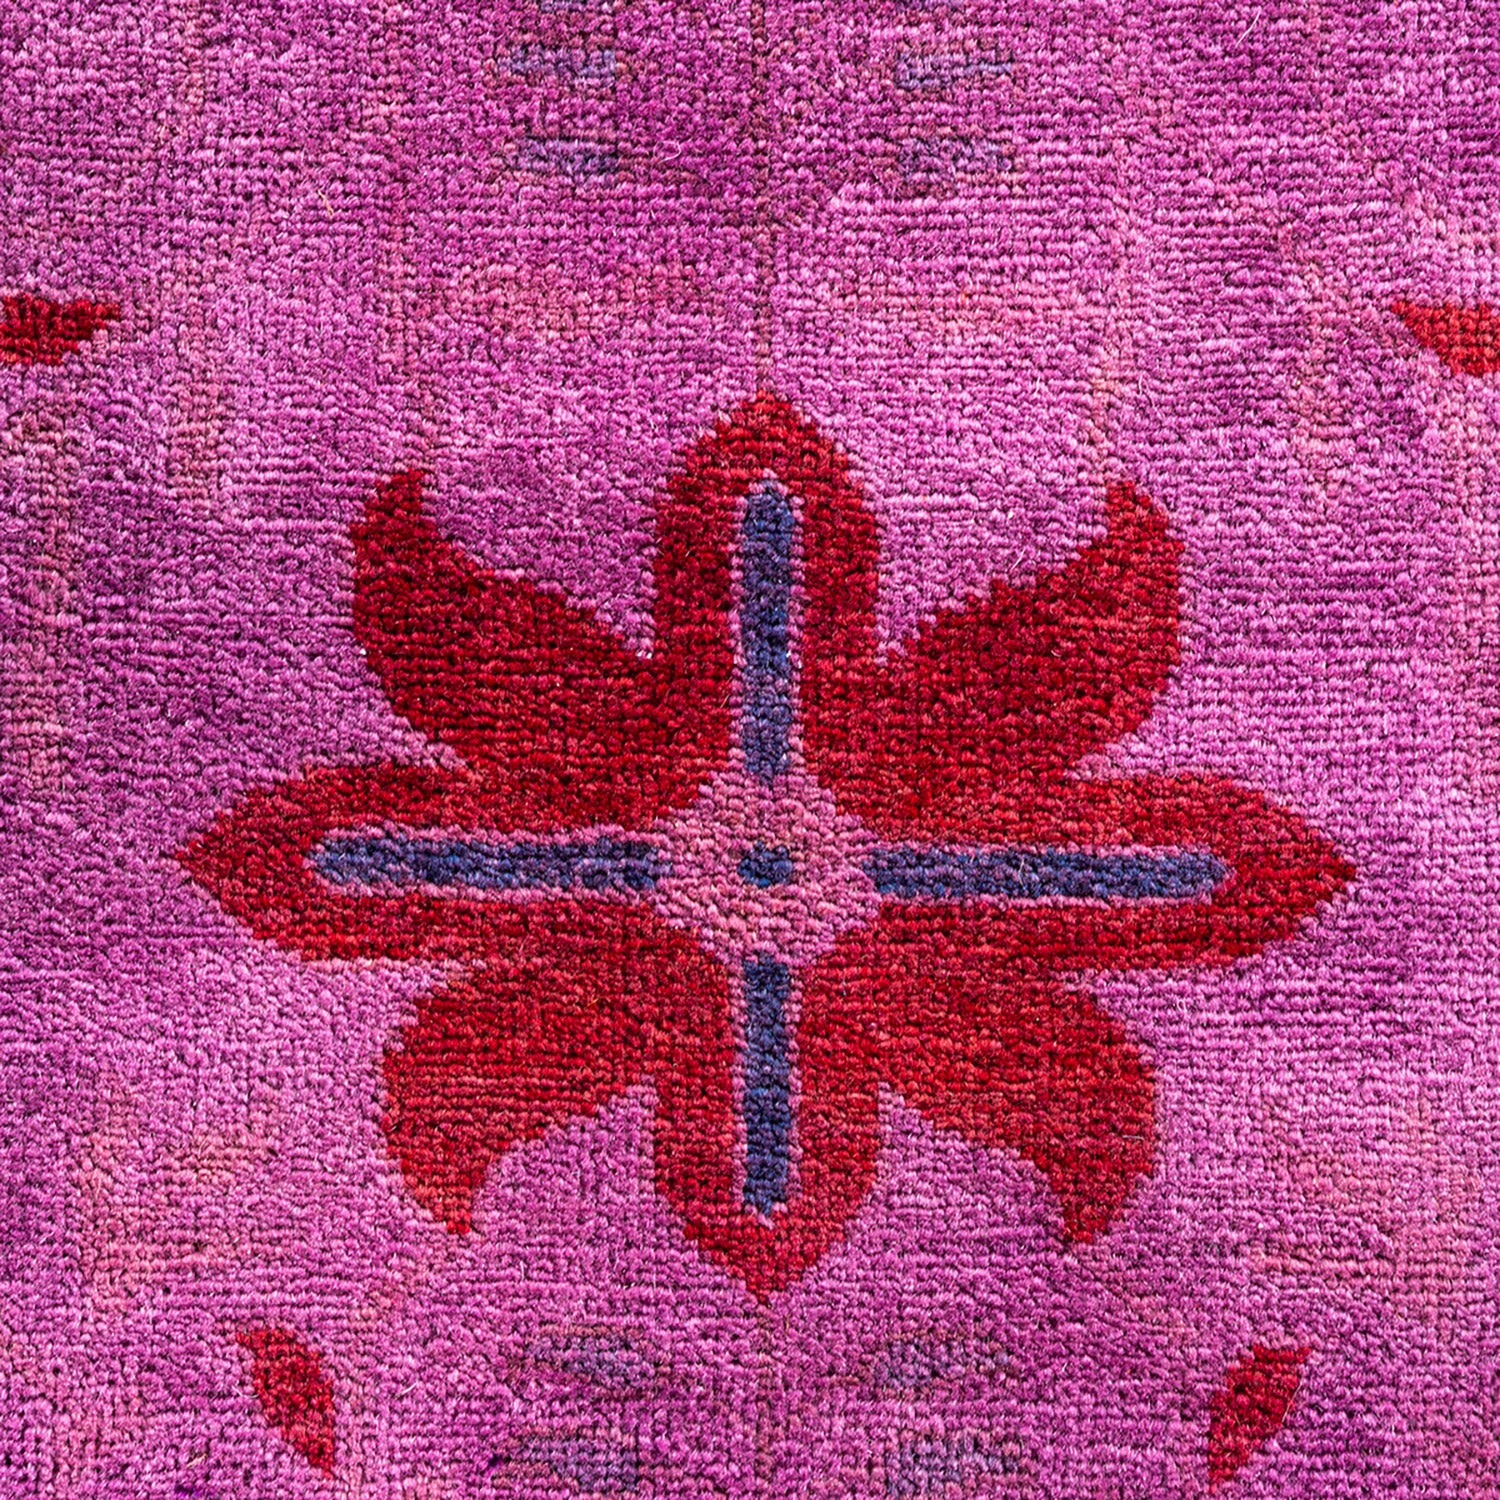 Color Reform, One-of-a-Kind Hand-Knotted Area Rug - Purple, 9' 2" x 12' 1" Default Title